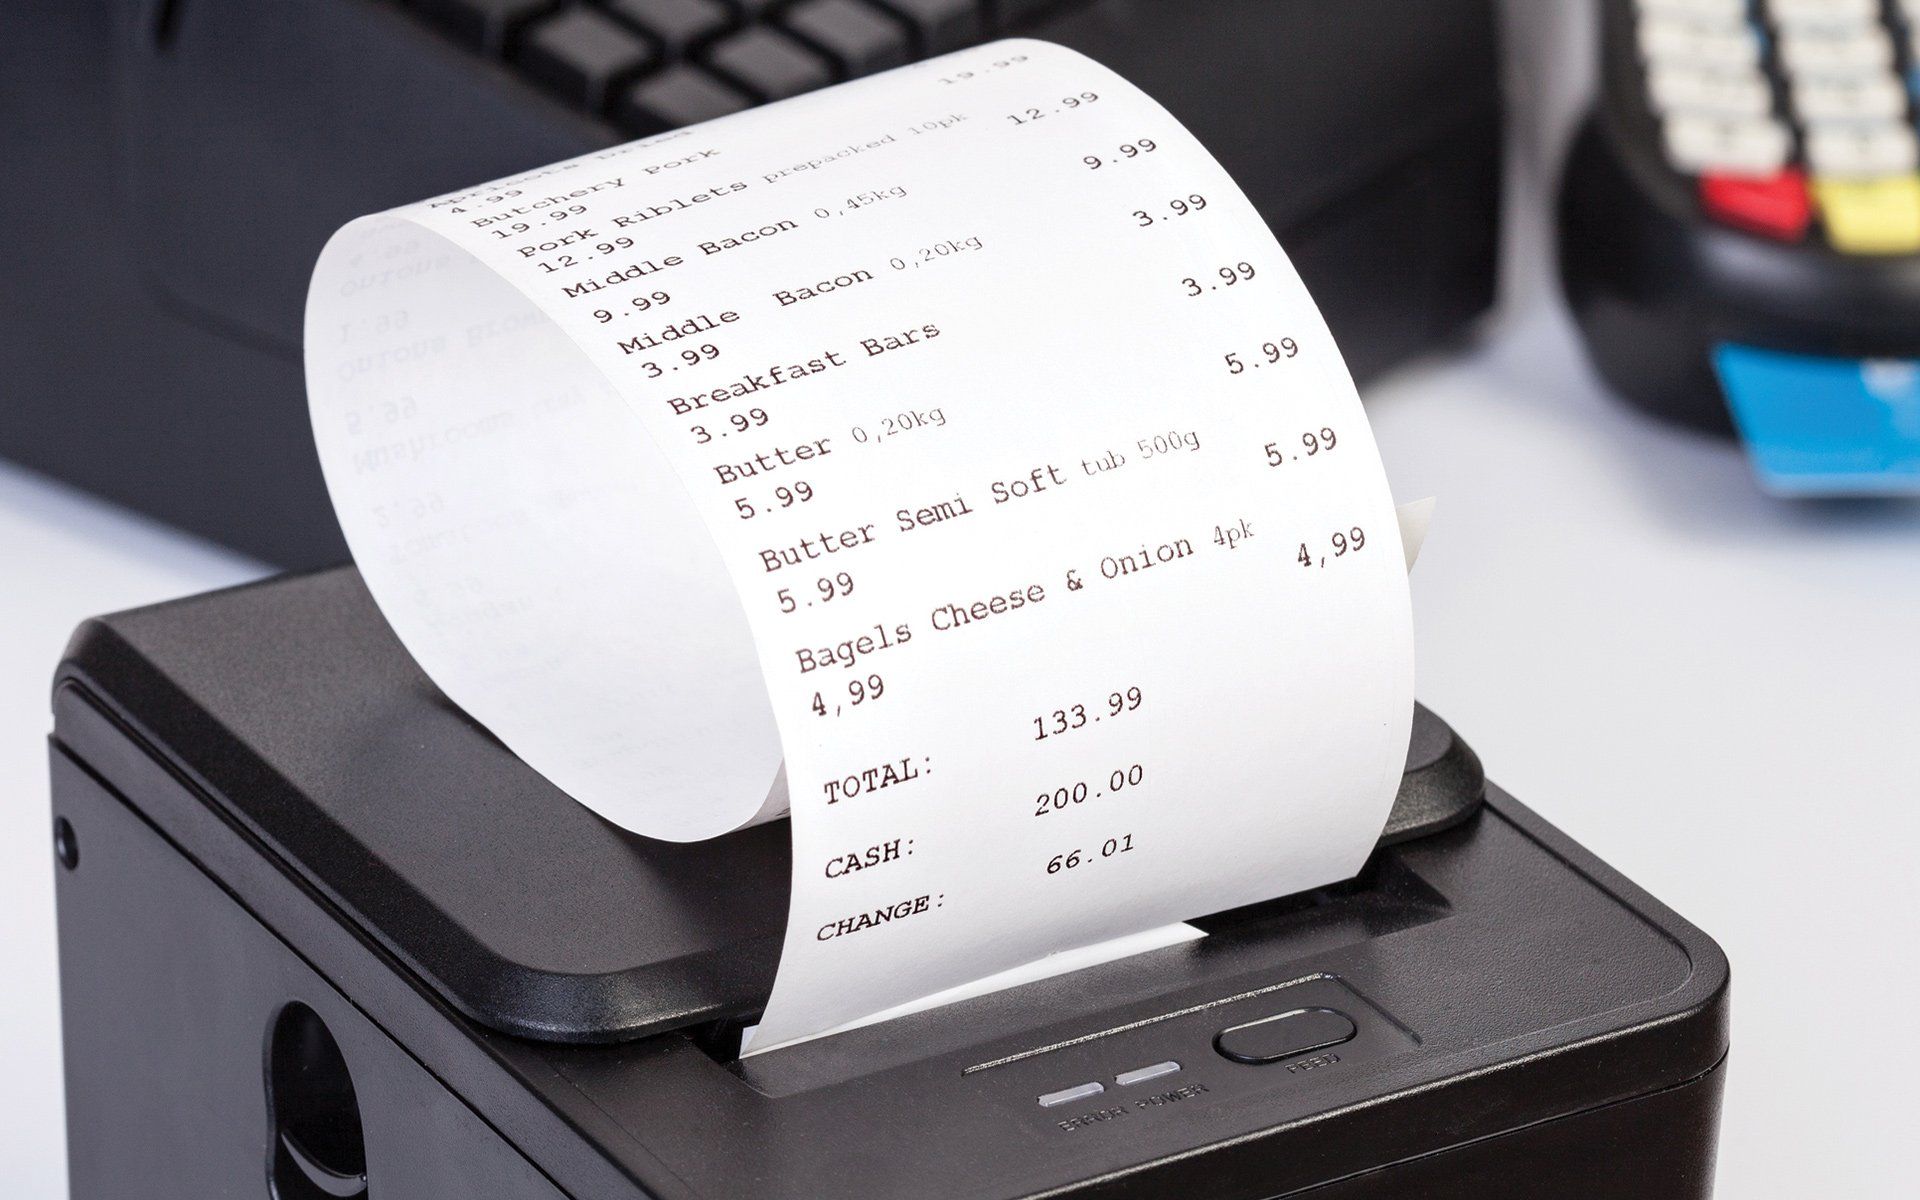 Receipt Printer with Paper Shopping Bill — Easthampton, MA — Forbes Snyder Advanced Business Solutions